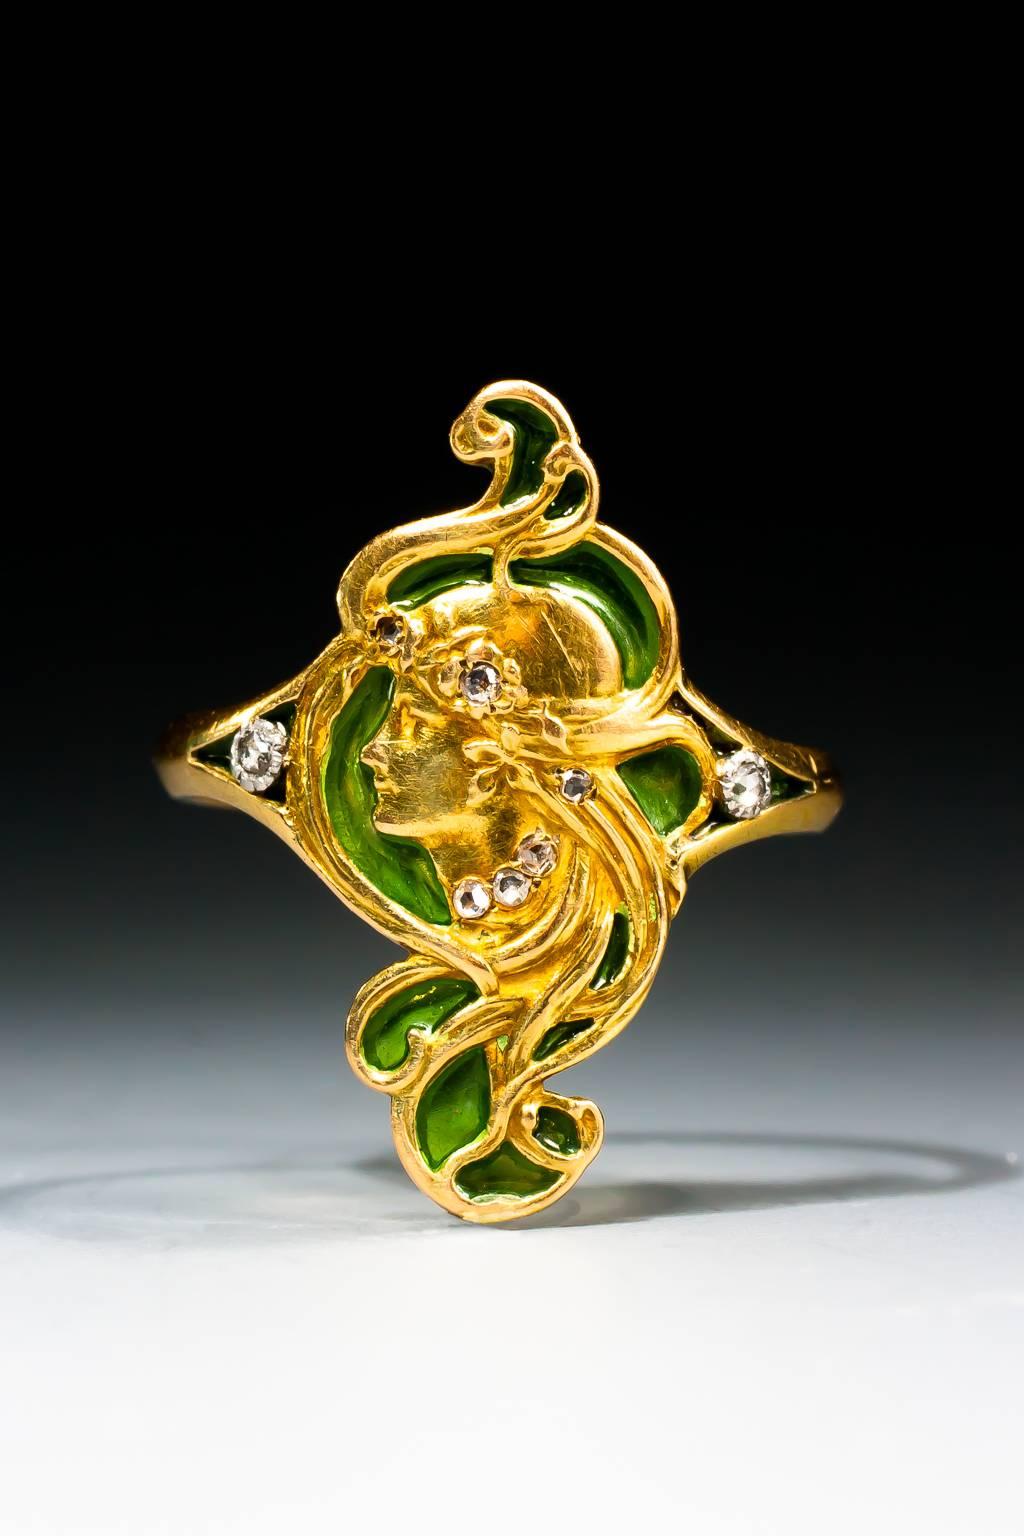 A very fine Art Nouveau gold, diamond and plique-à-jour enamel ring by André Rambour, depicting the face of a maiden in profile, with undulating tresses and rose cut diamond highlights, wearing a rose cut diamond necklace, on a green